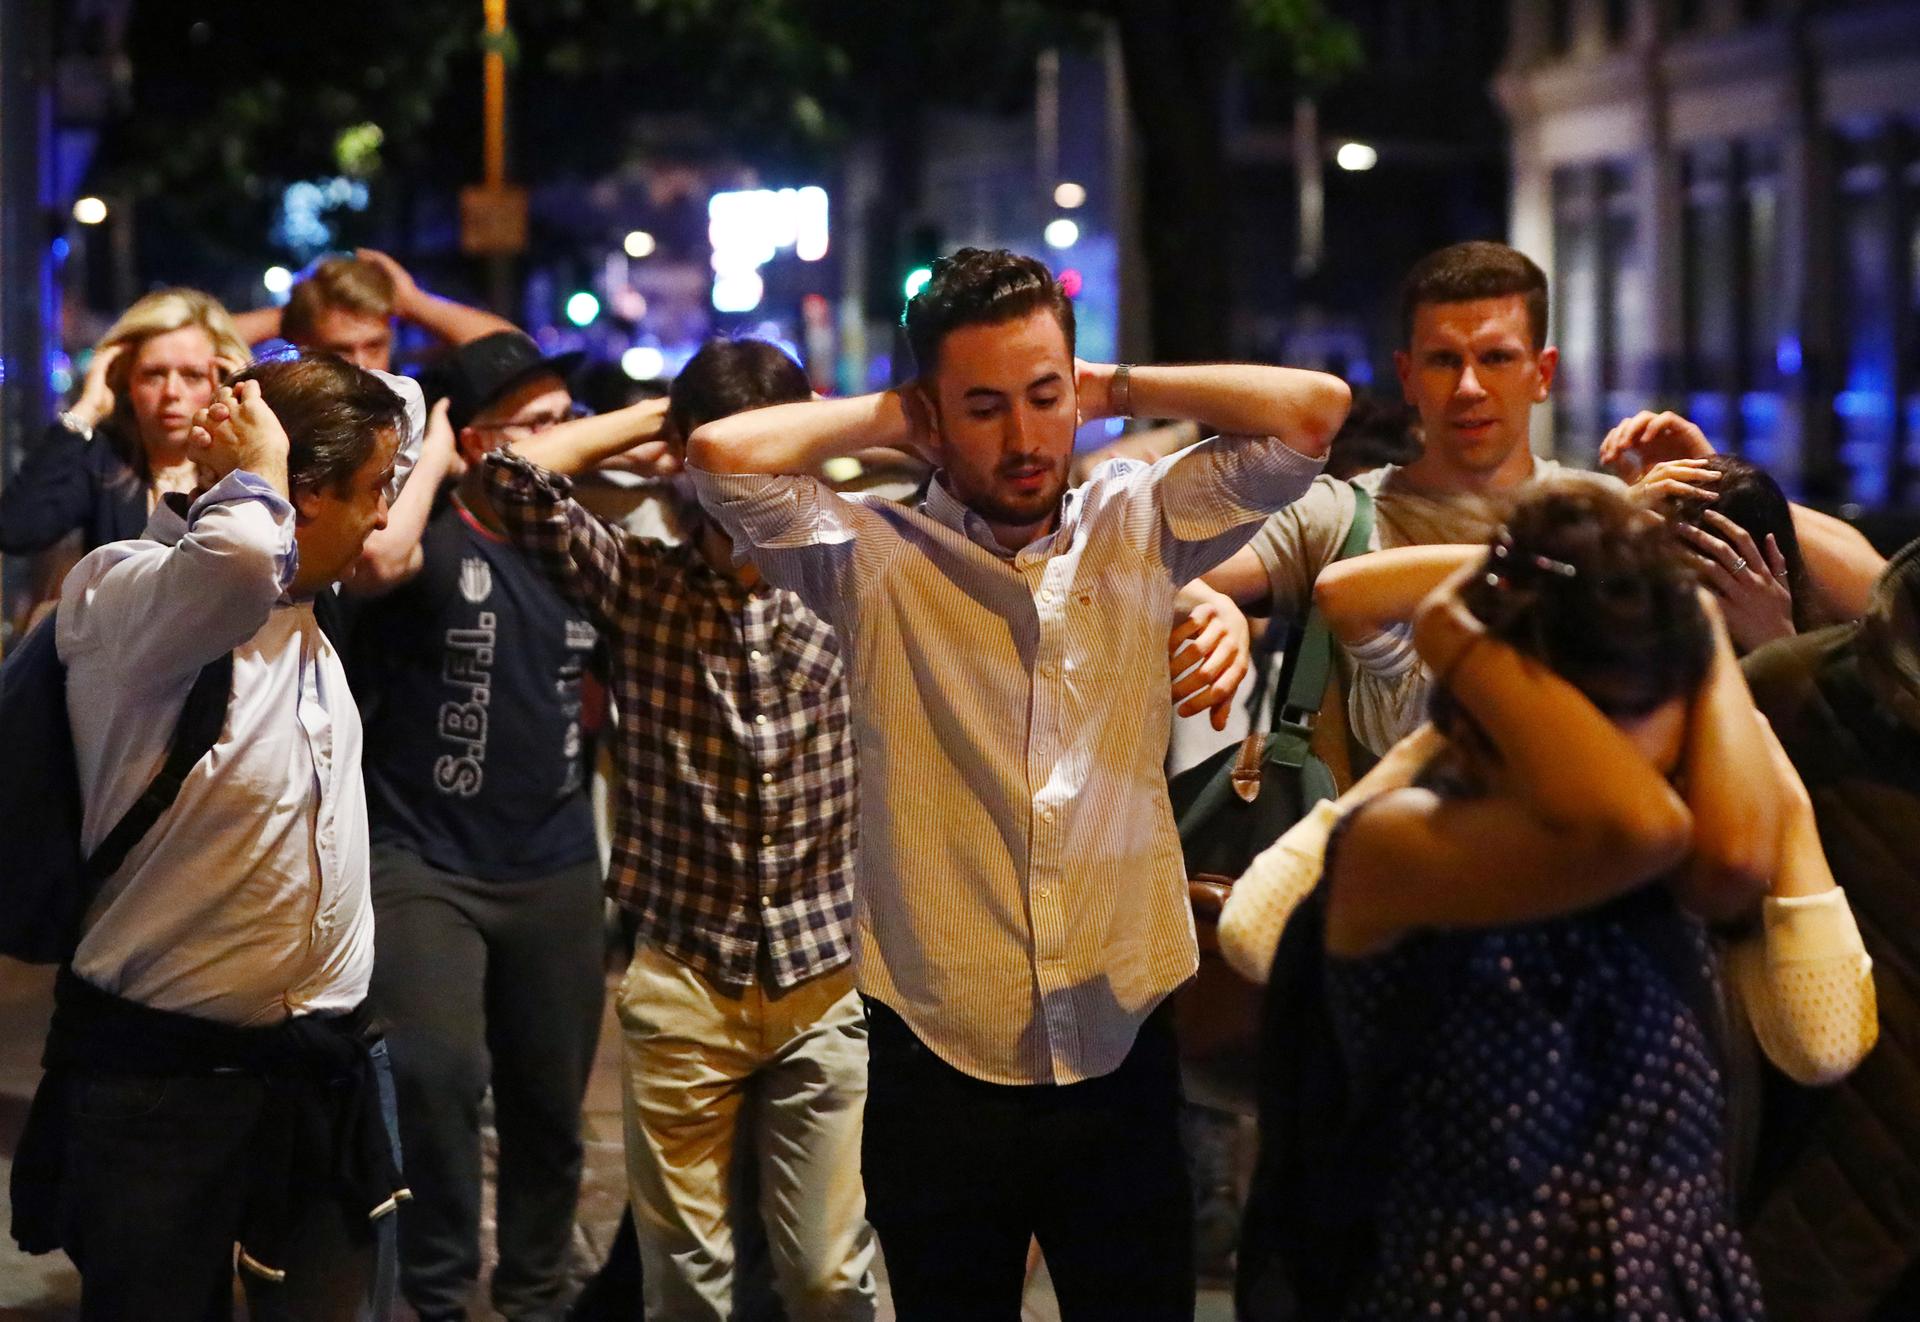 People leave London Bridge area with their hands up after the attack.